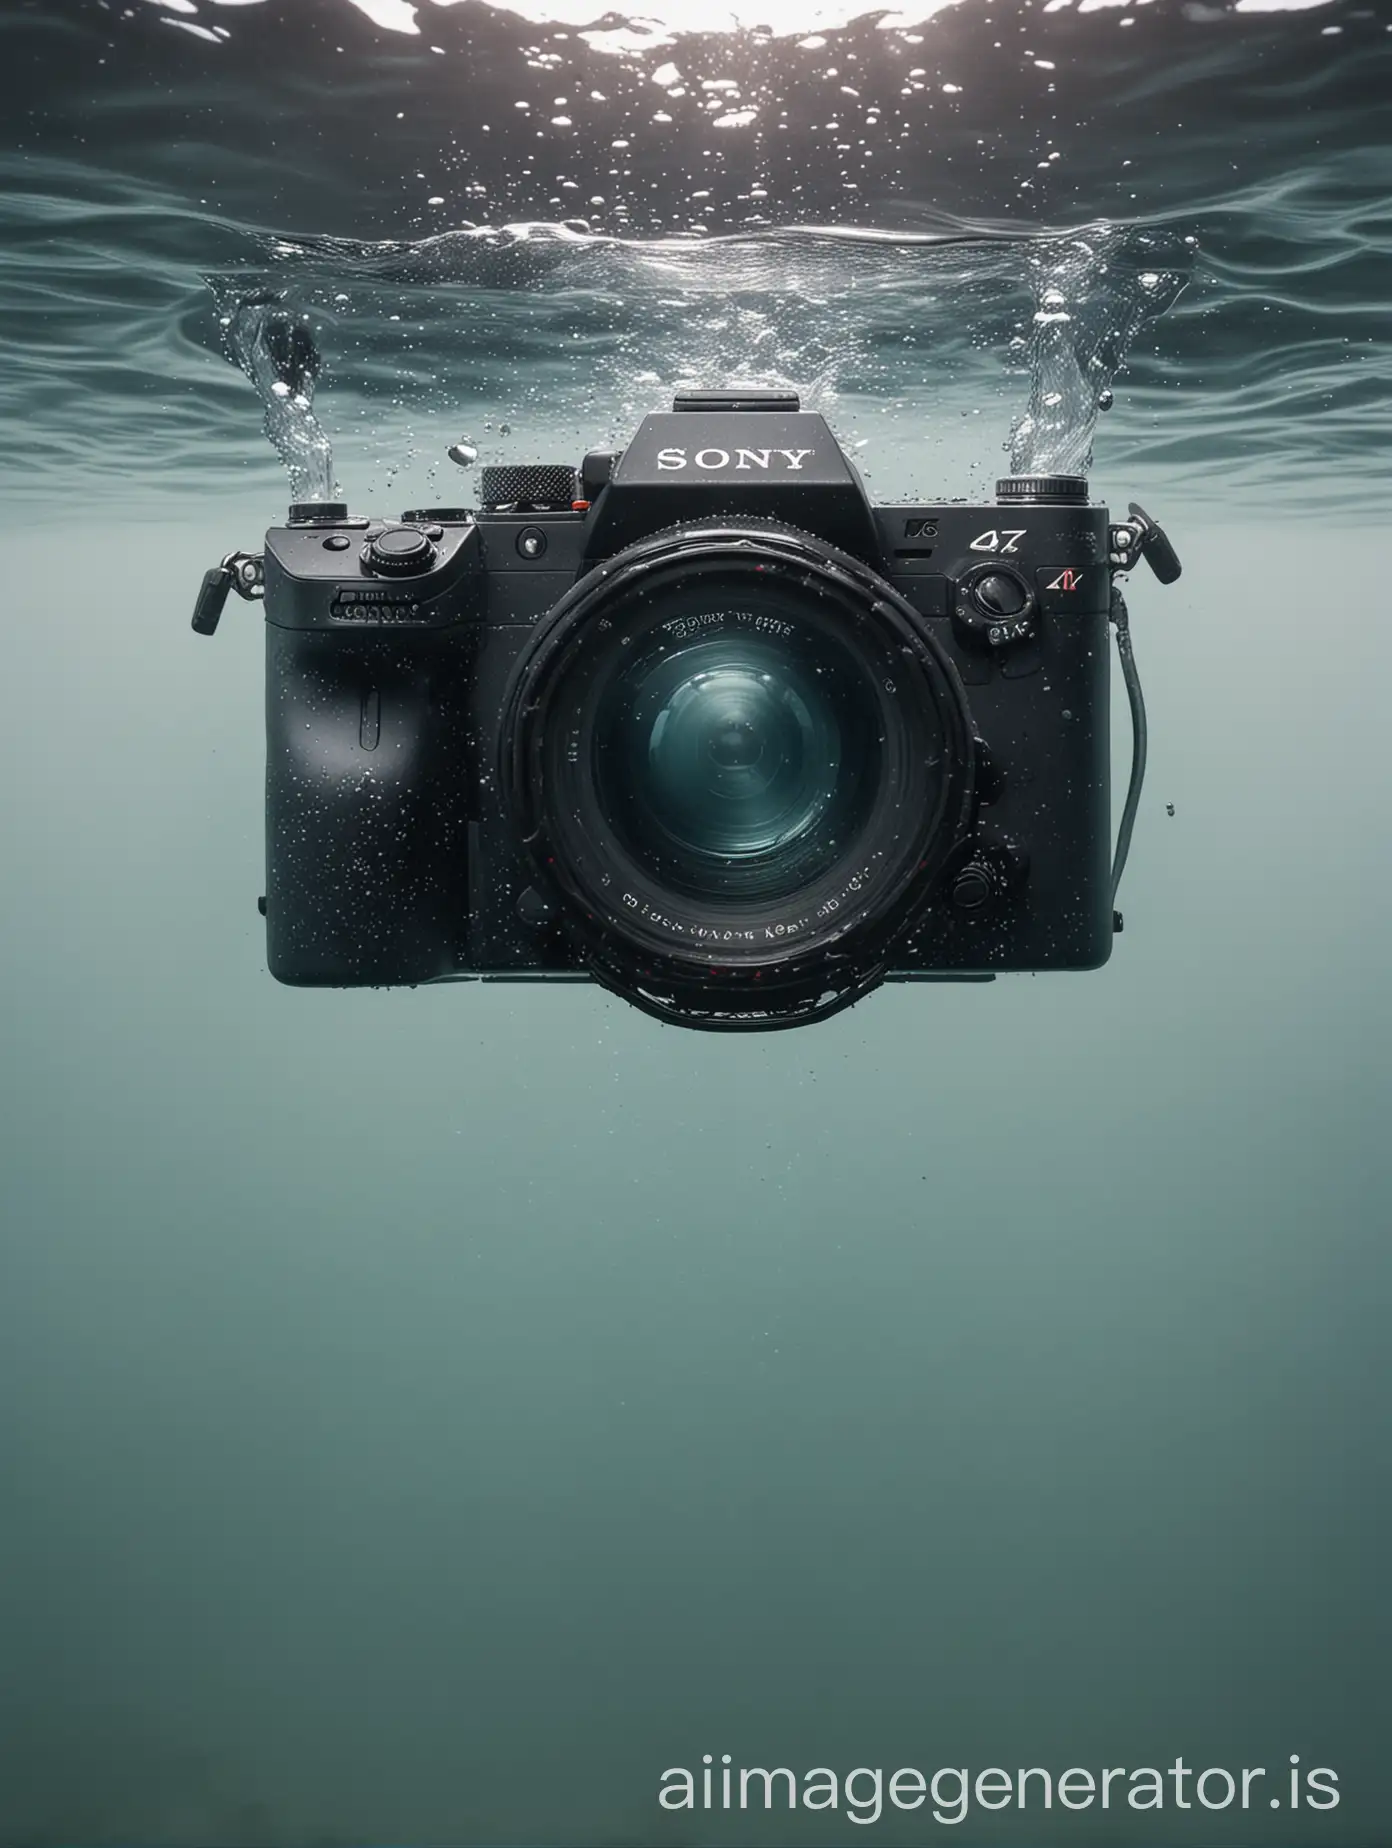 realistic under water, camera half in sea water, a sony camera mirrorless Alpha 7 s mark 2, neutral background.